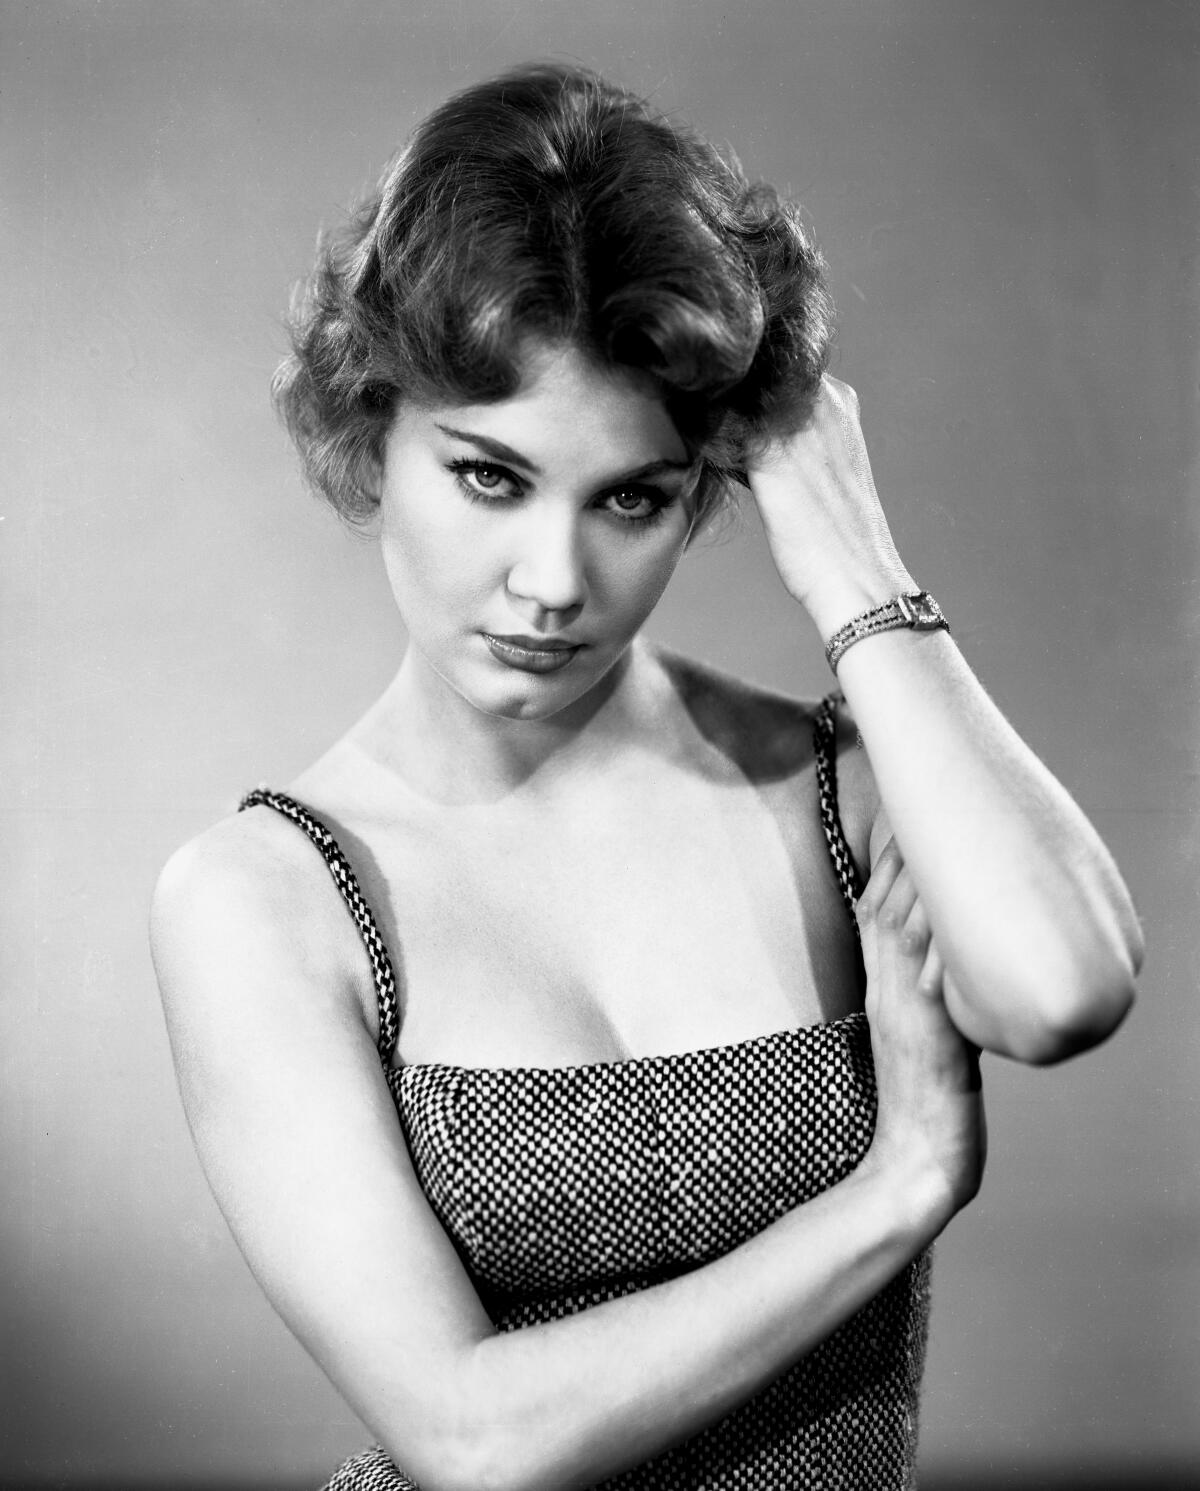 Elizabeth MacRae poses in spaghetti-strap top, with her hand in her hair, in a black-and-white portrait.